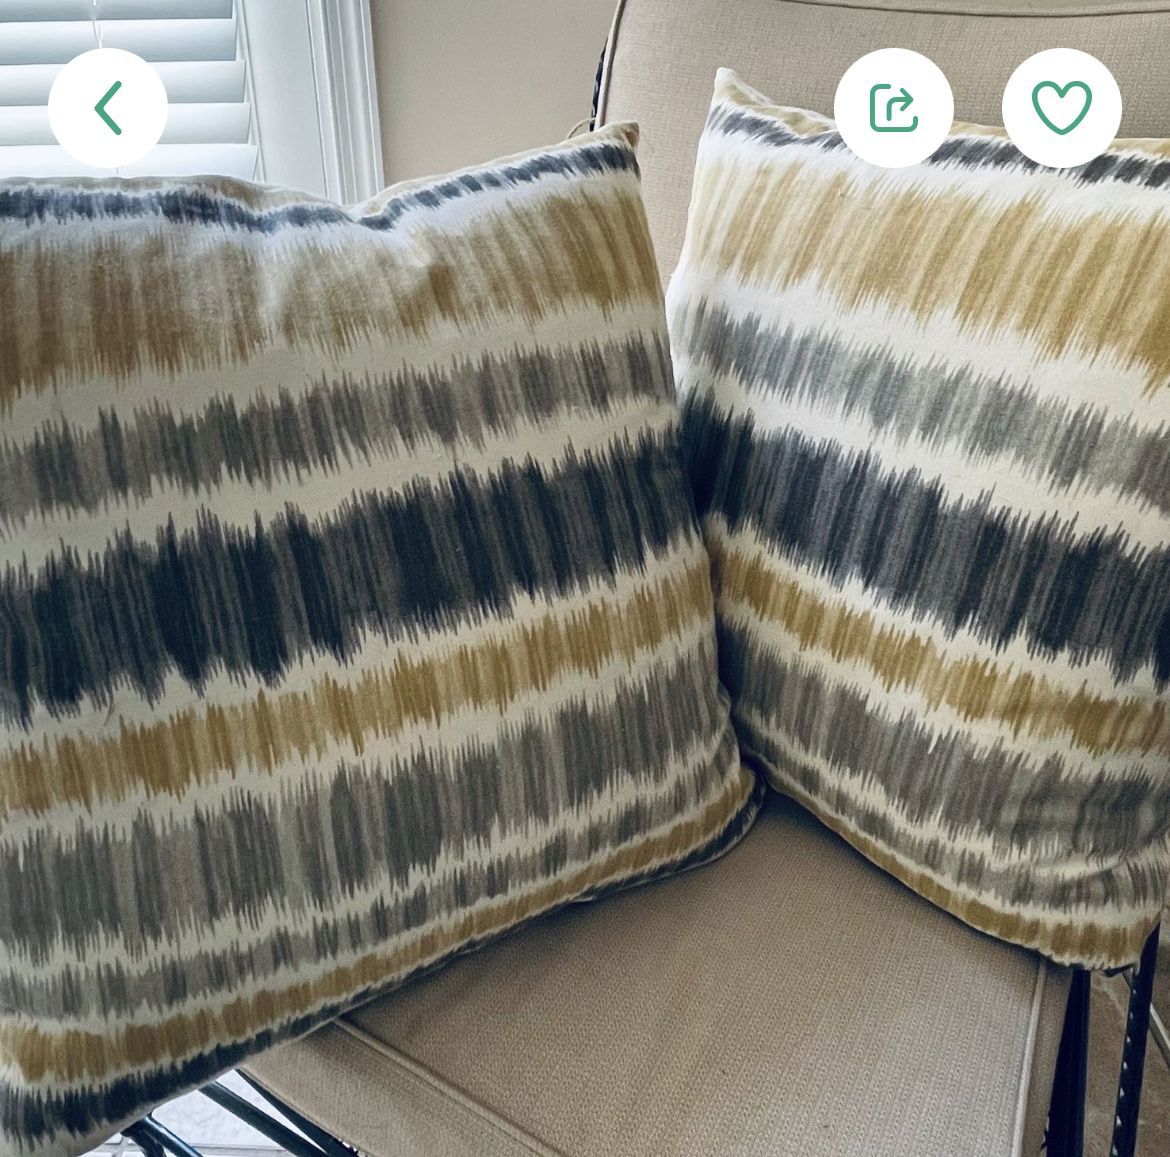 Pair Of Decortative Pillows ~ $10 For Both